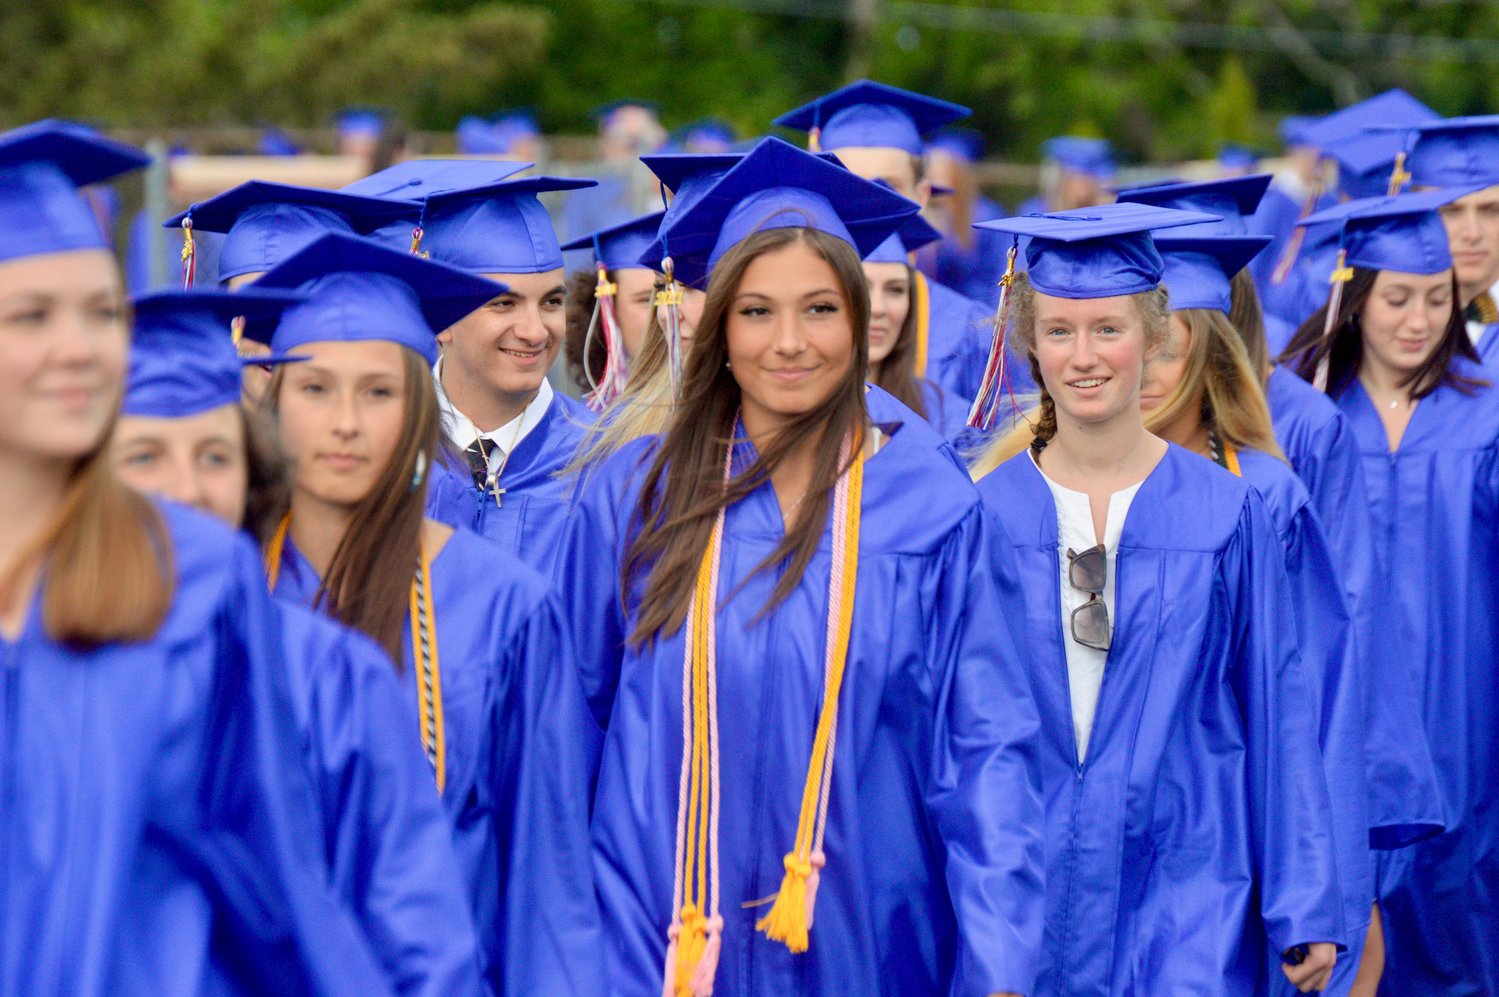 Members of the Class of 2021 march from the school to the baseball field, where graduation was held.